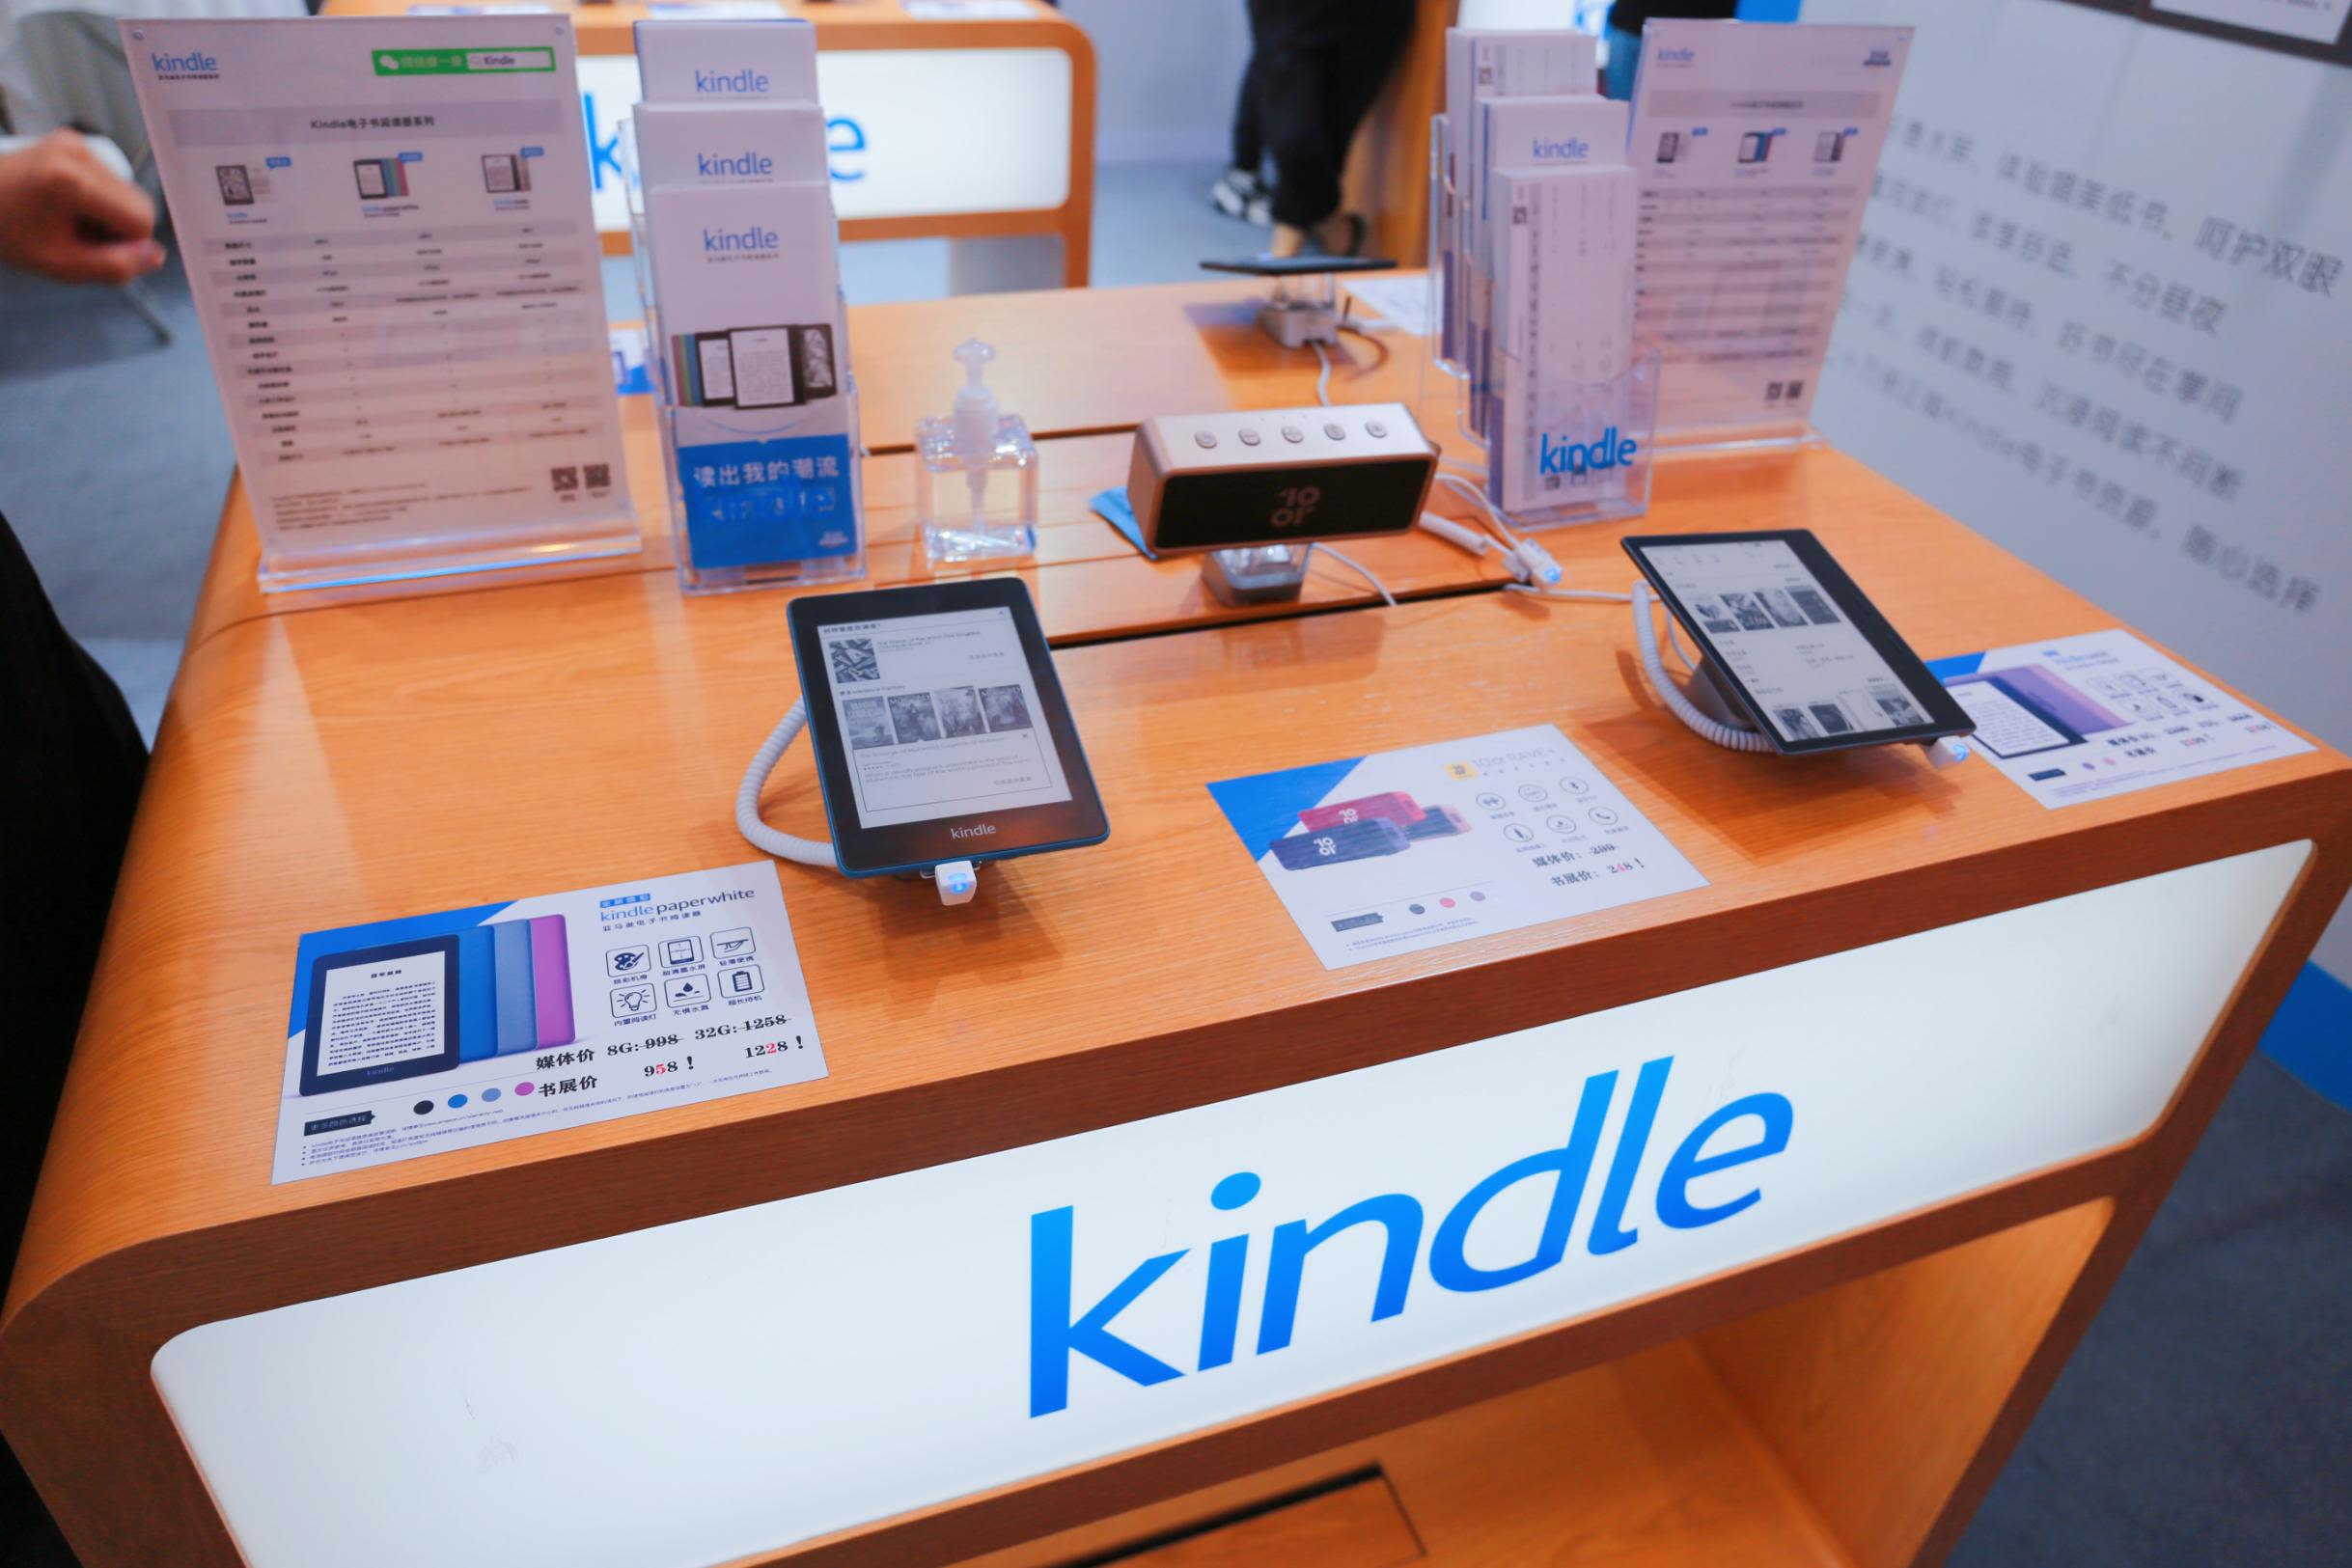 is closing its Kindle store in China